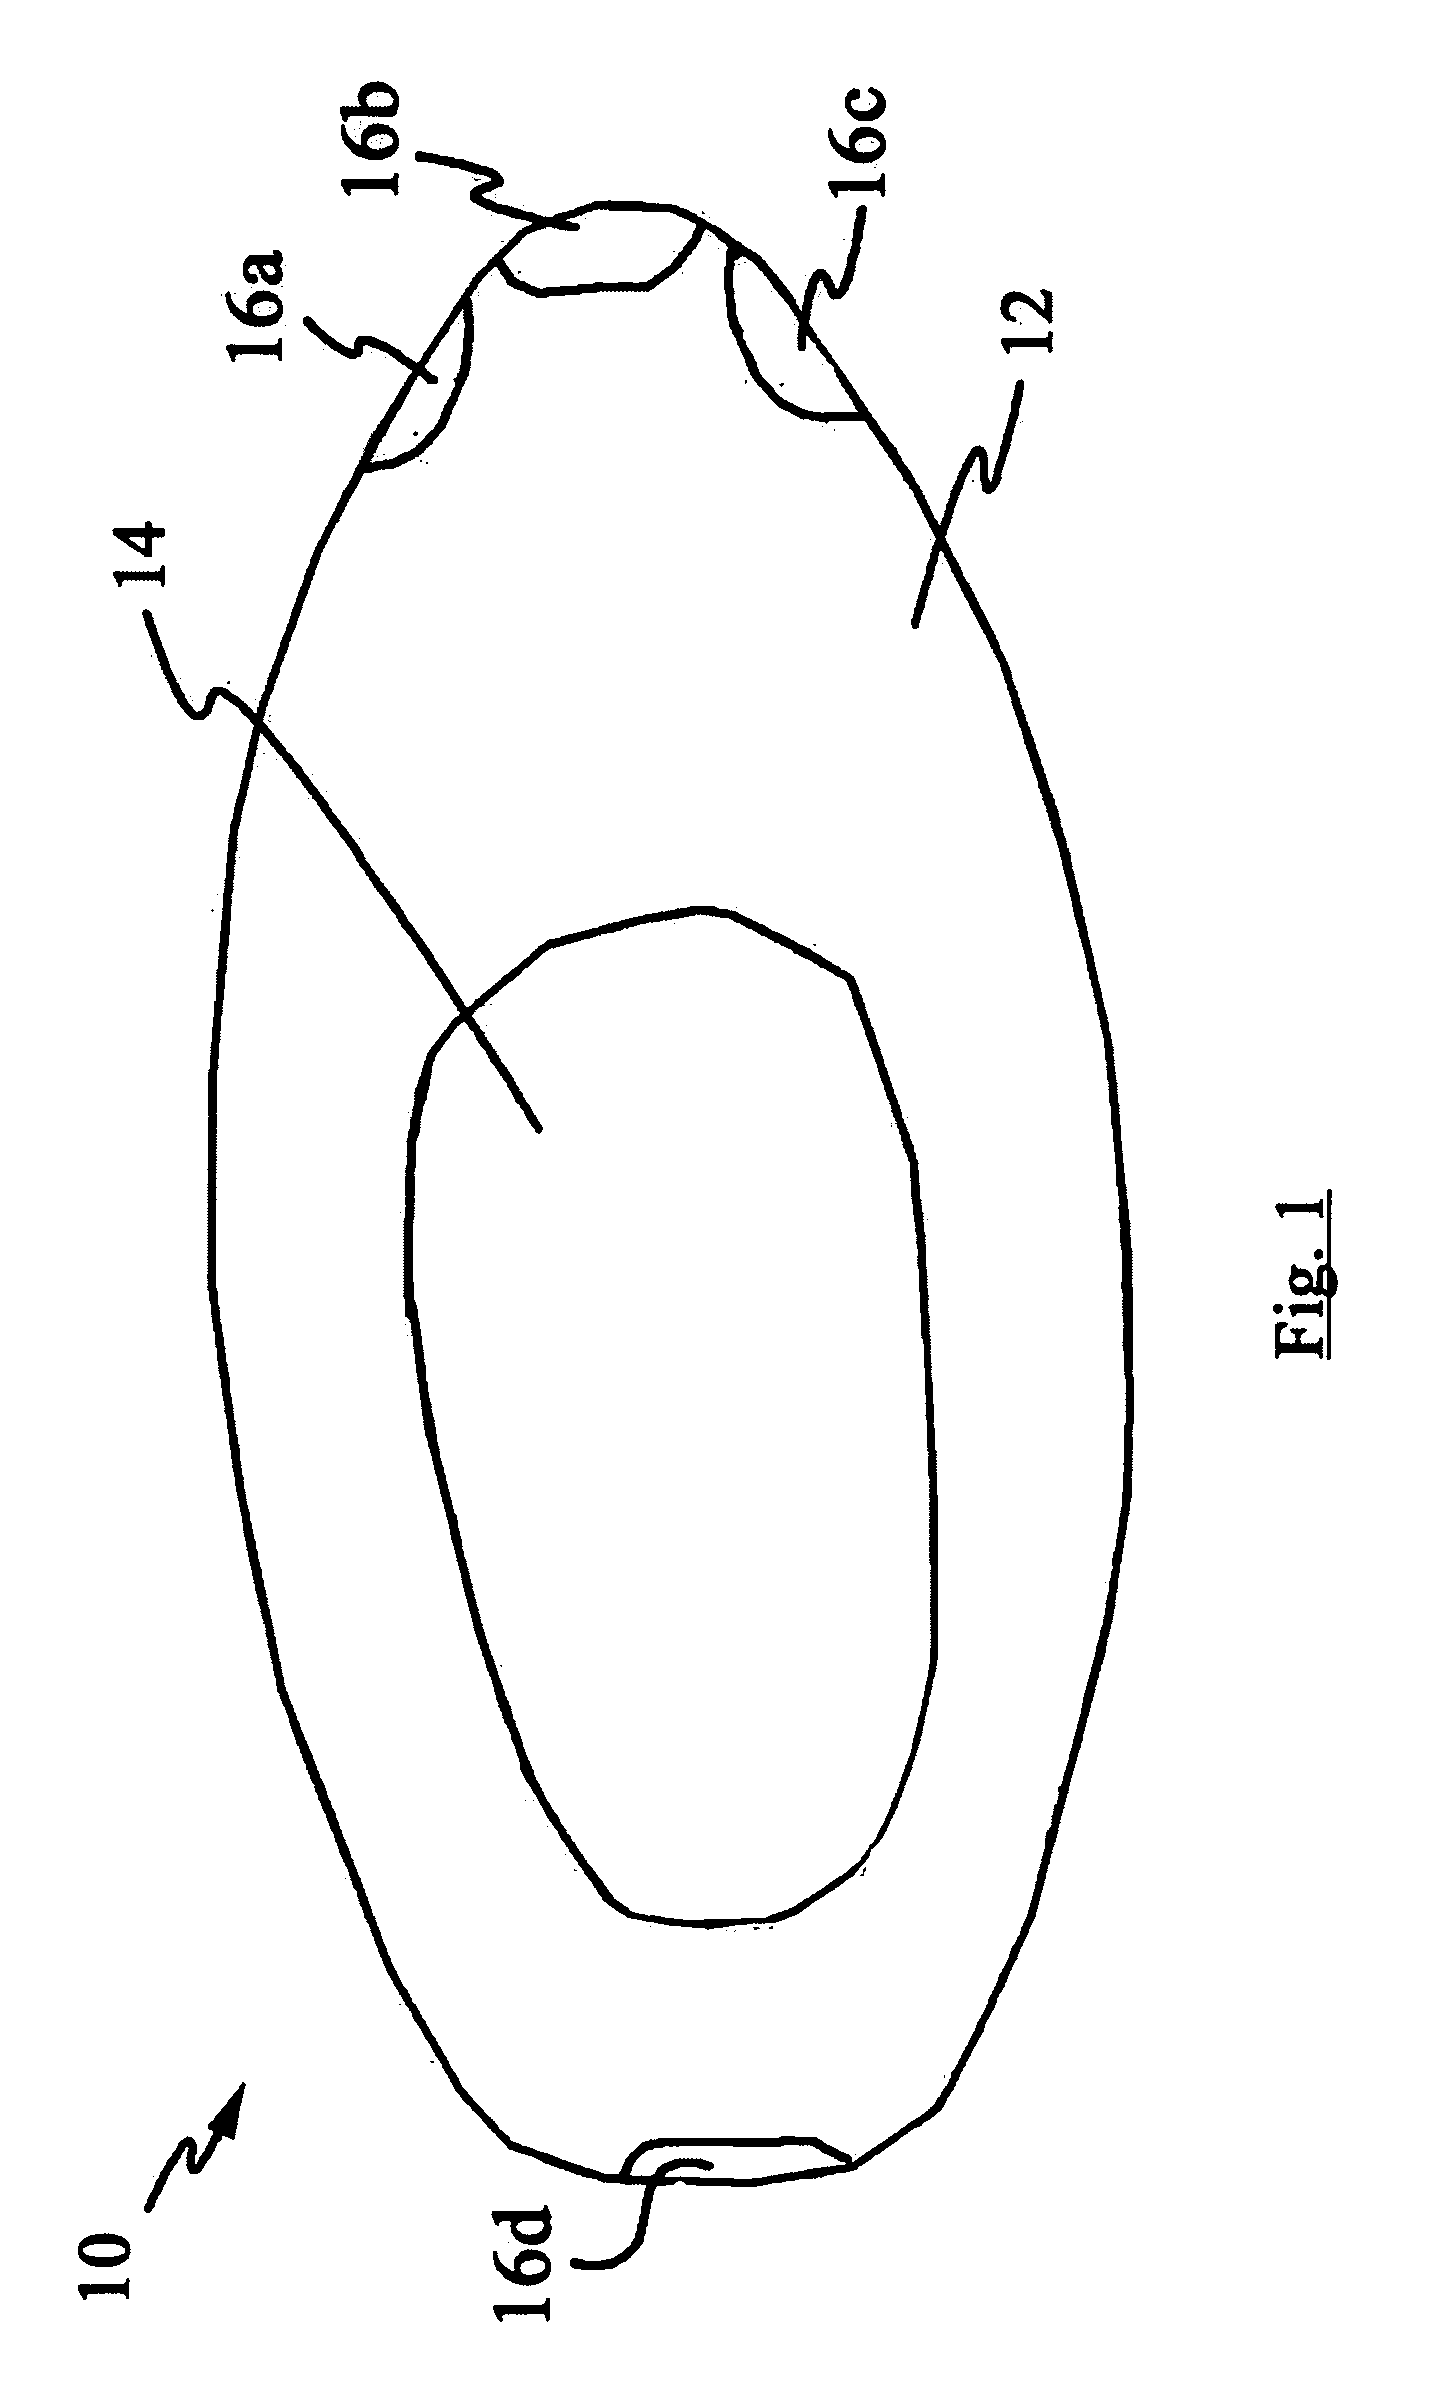 Powered riding apparatus with electronic controls and options